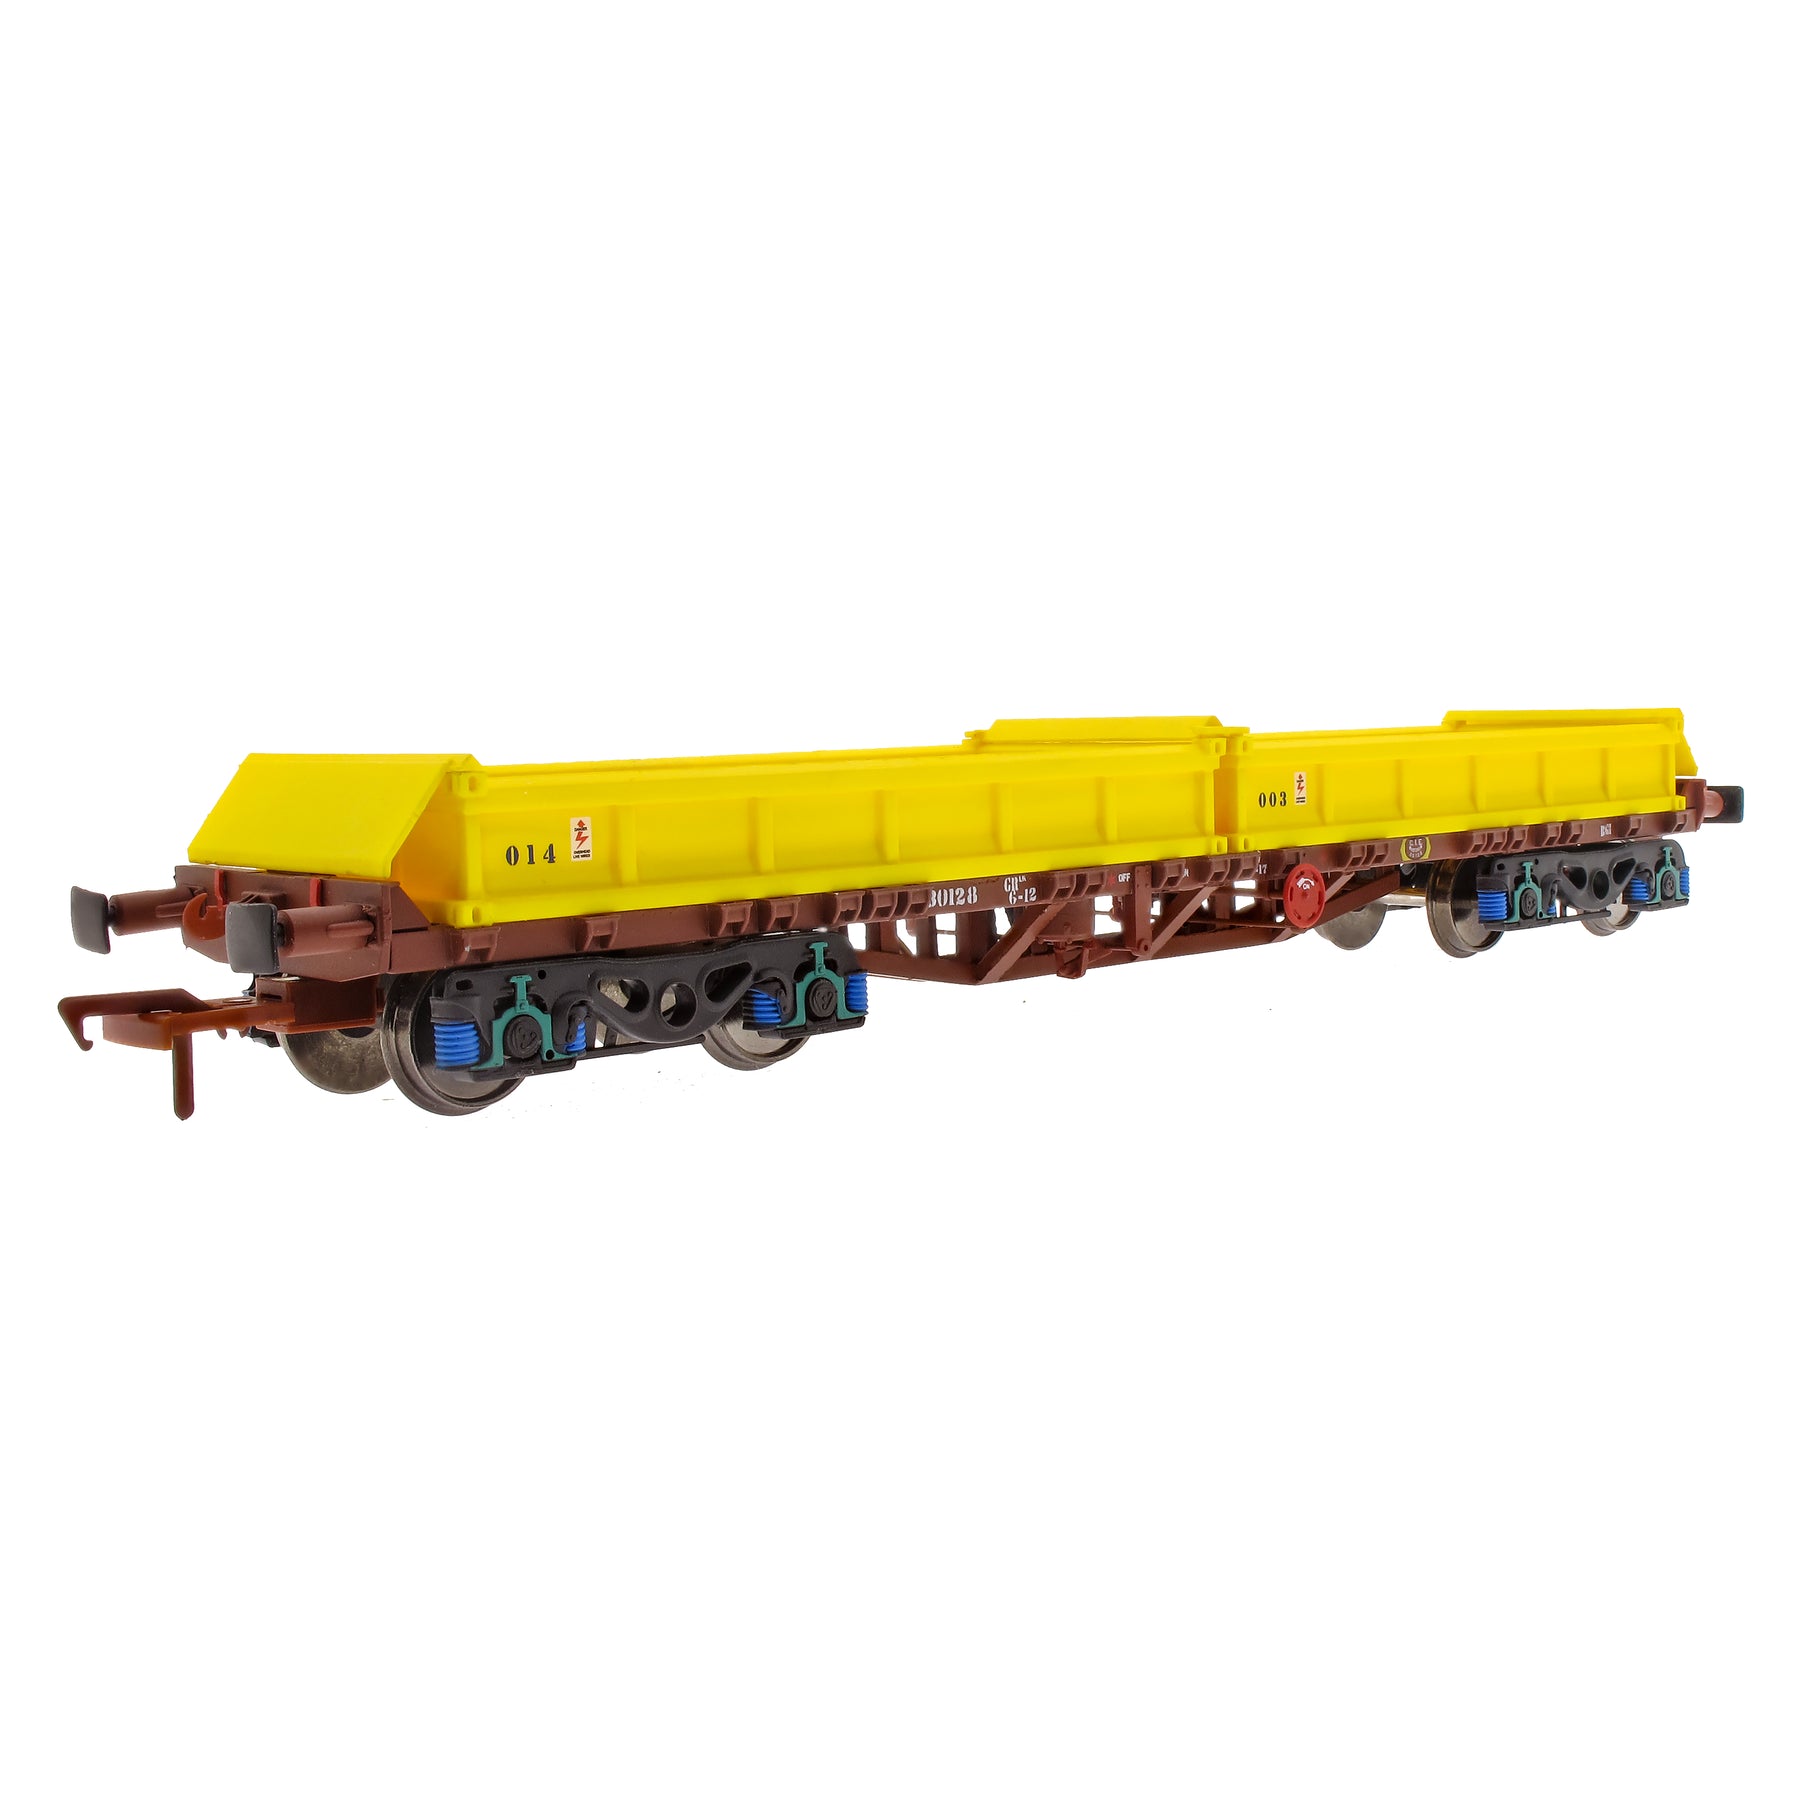 IRM Spoil Wagons Are Here and IN STOCK NOW!!!